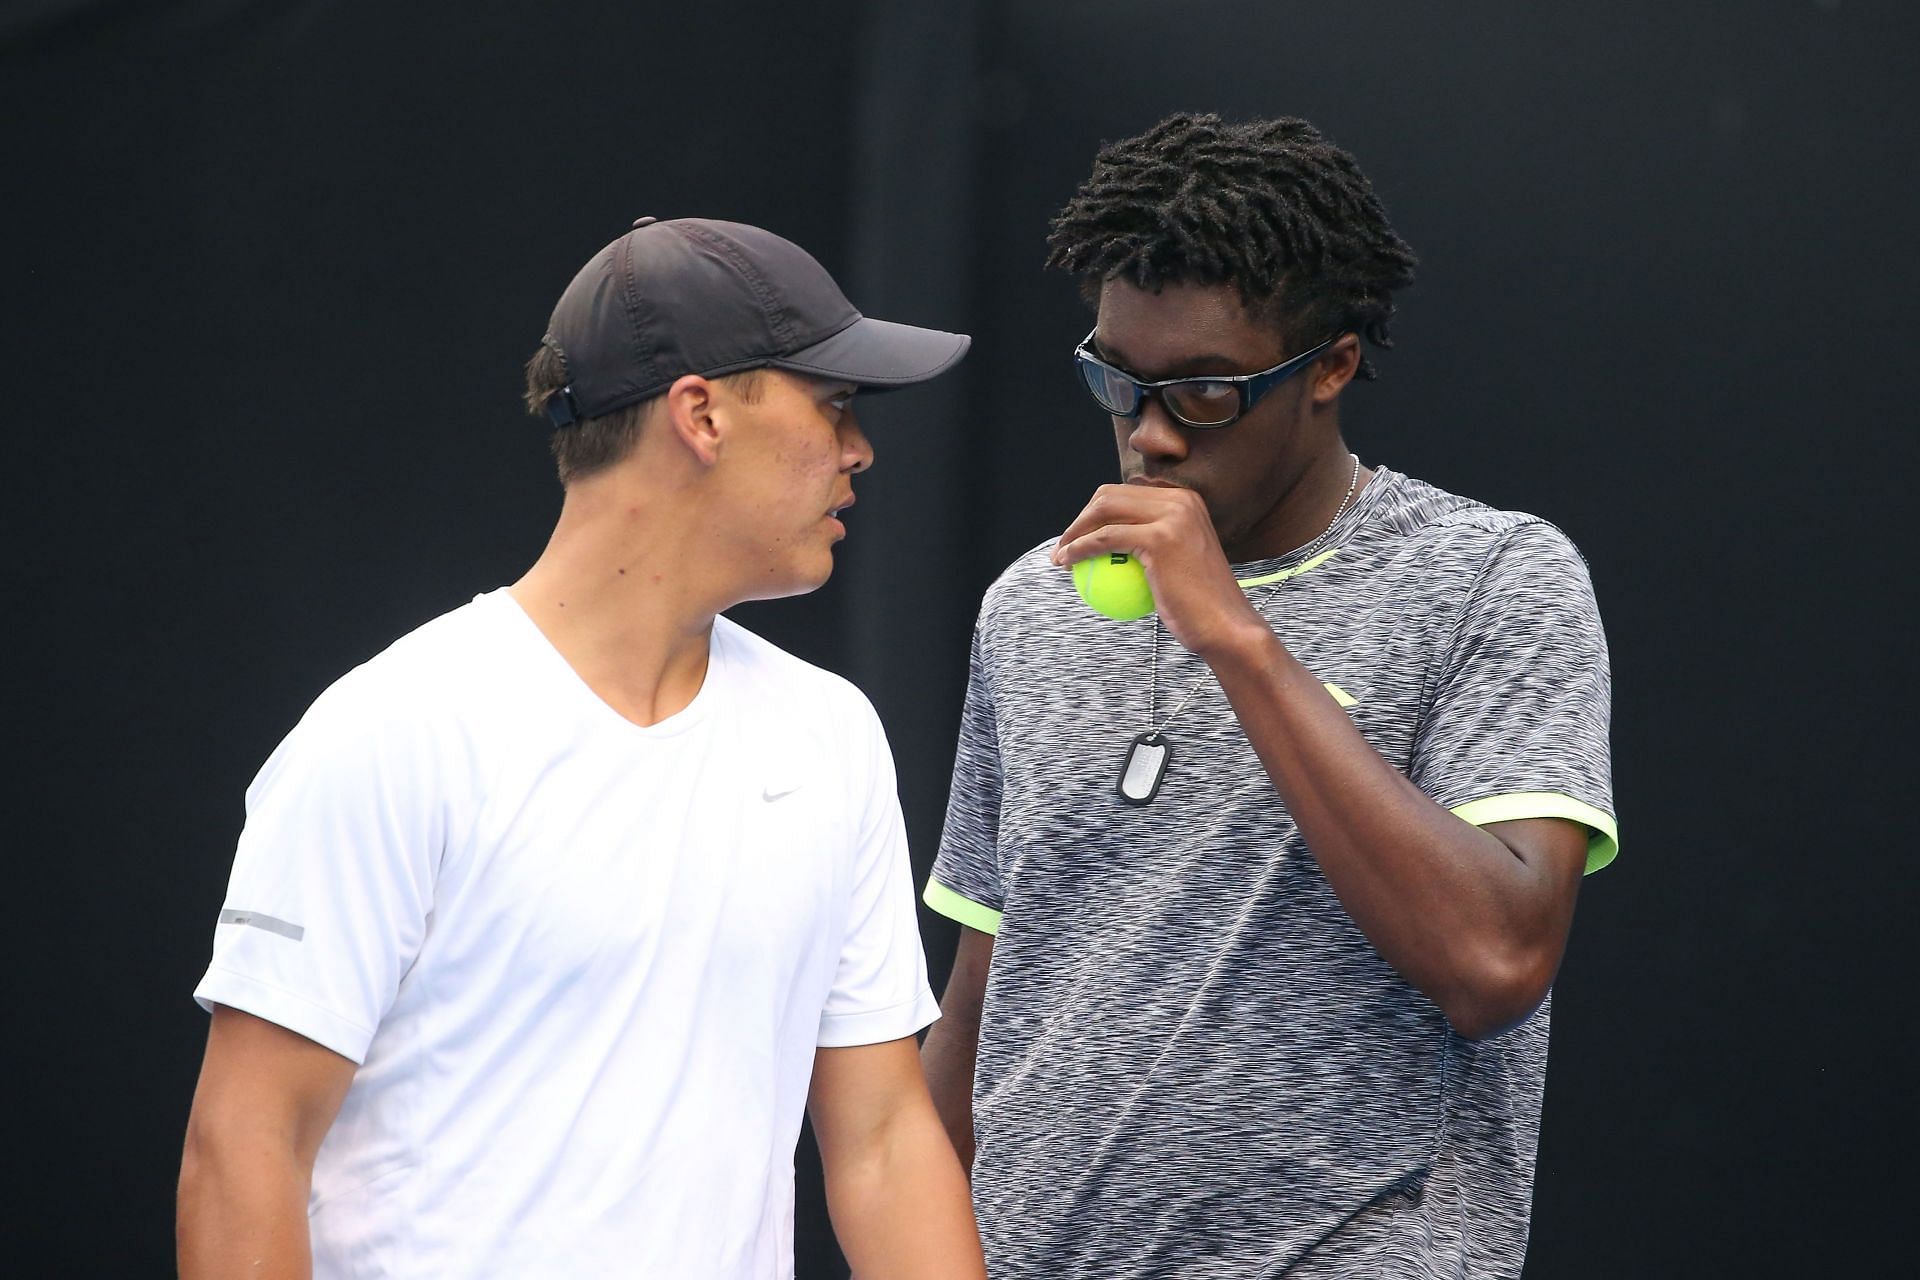 Alafia Ayeni pictured with his doubles partner.